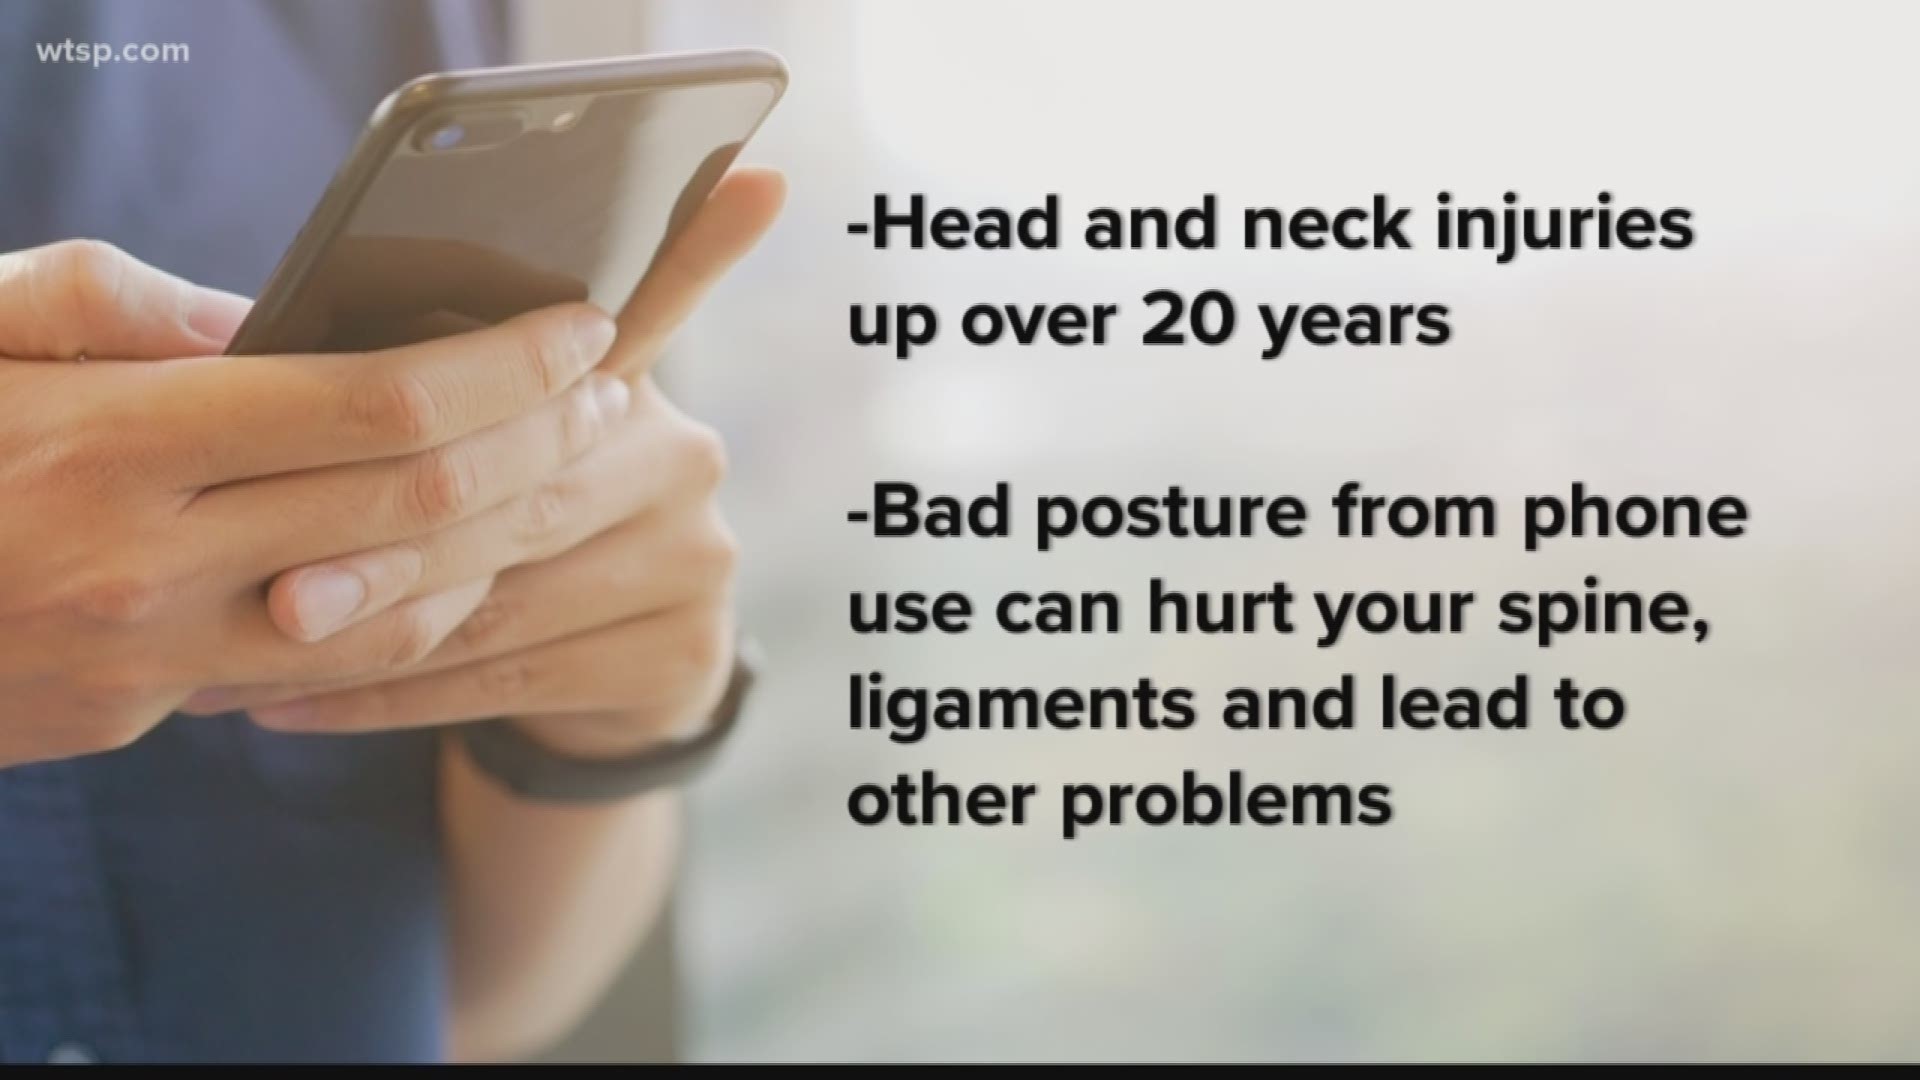 New medical research says head and neck injuries related to cellphone use have increased over the past 20 years.